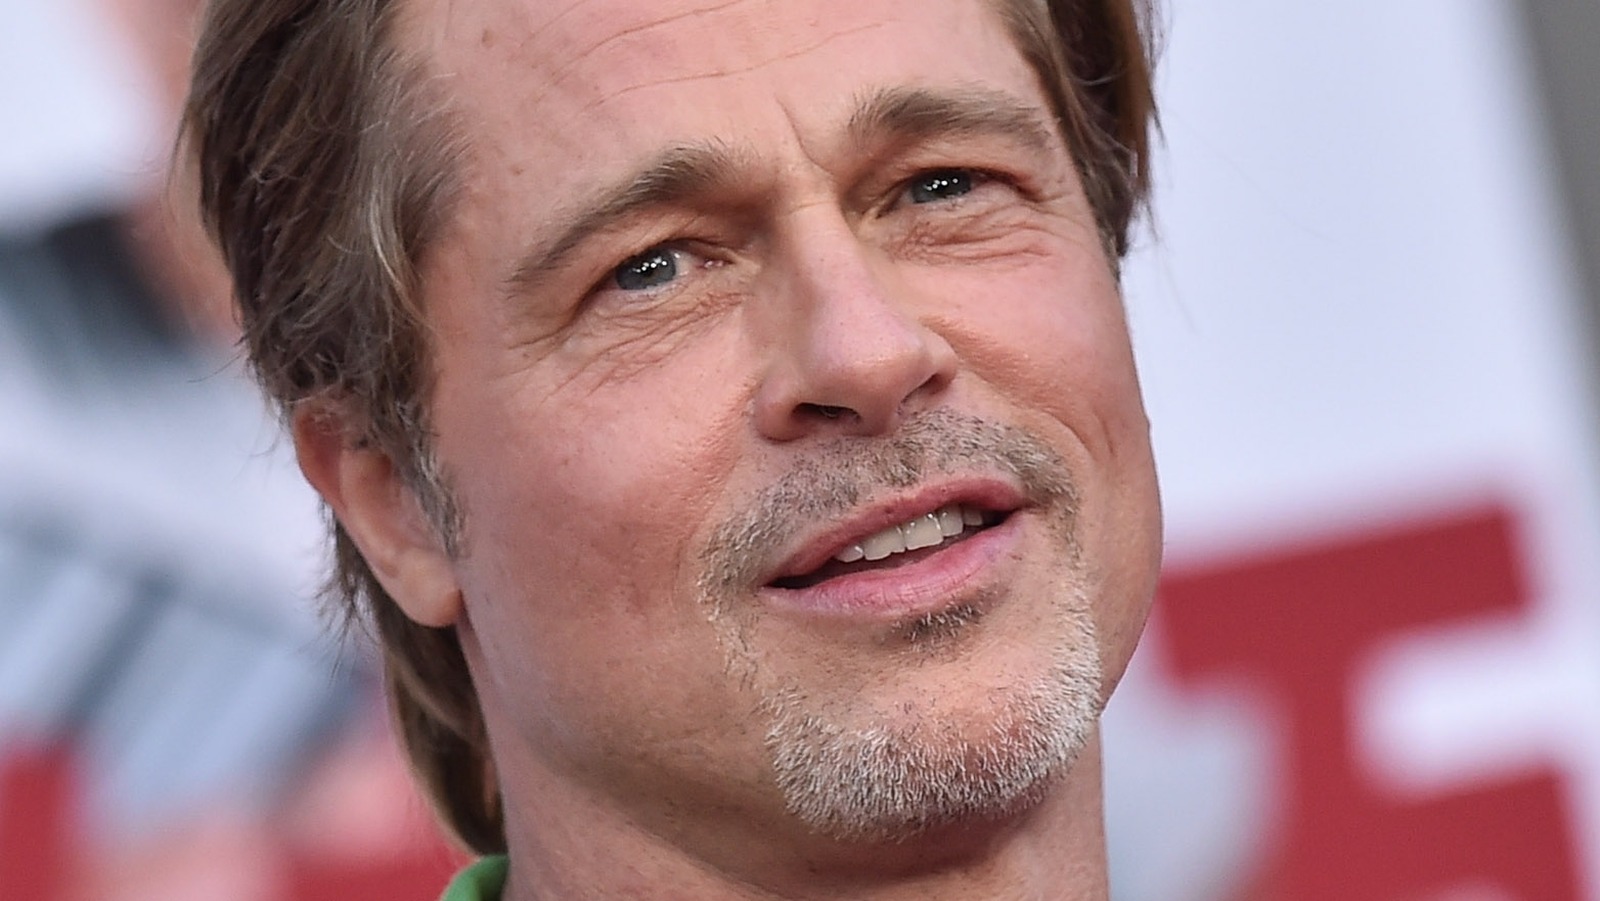 Disturbing Claims Emerge About Brad Pitt In Angelina Jolie's New Legal...